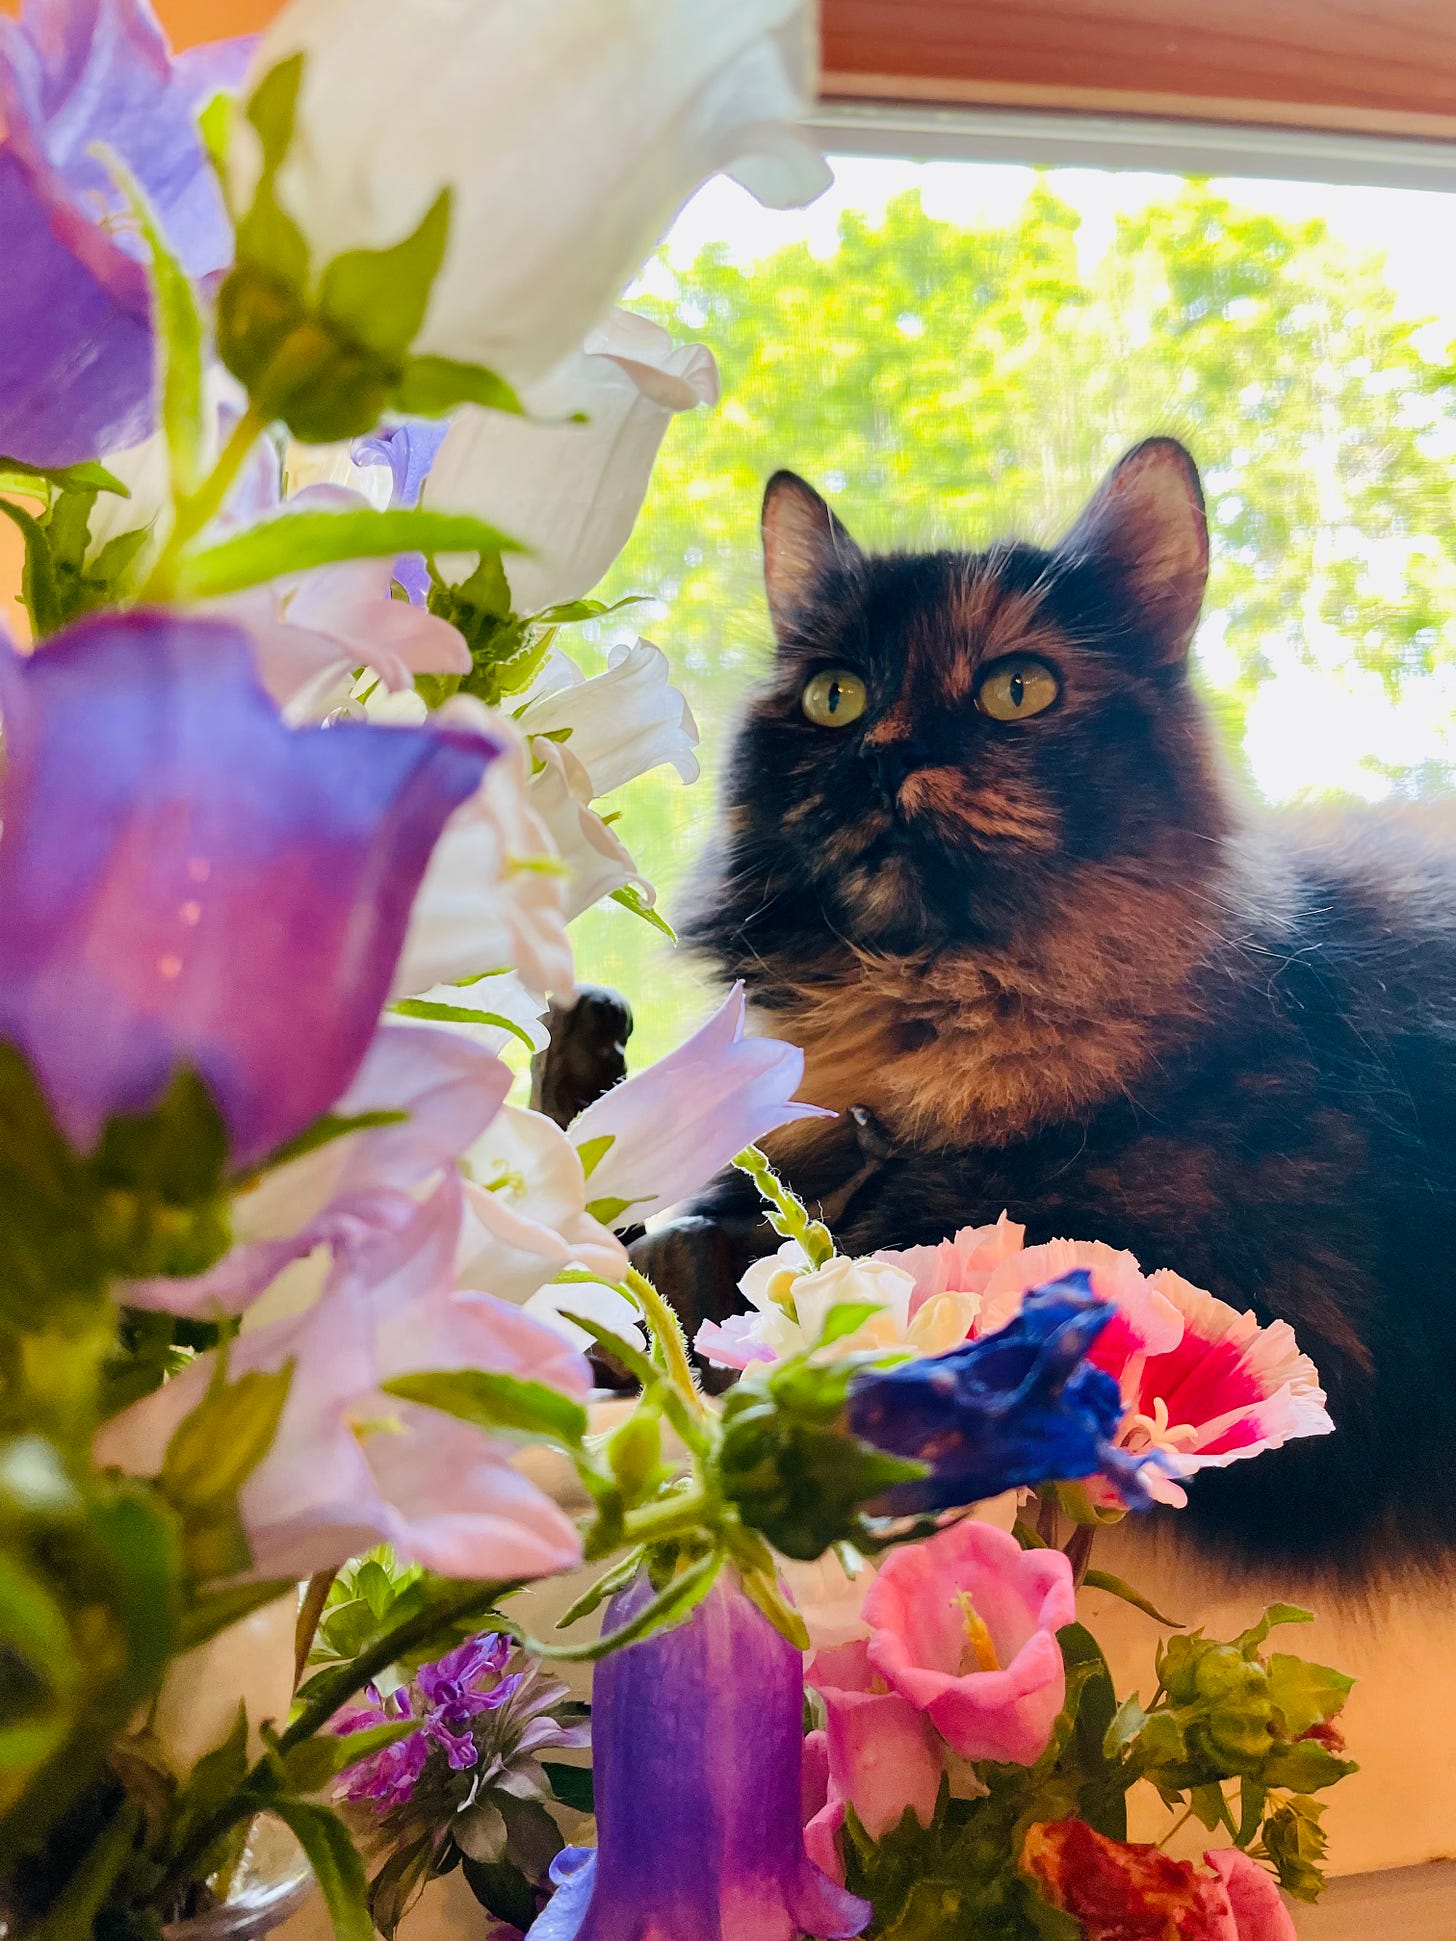 adorable cat sitting in windowsill looking at flowers which are in the foreground